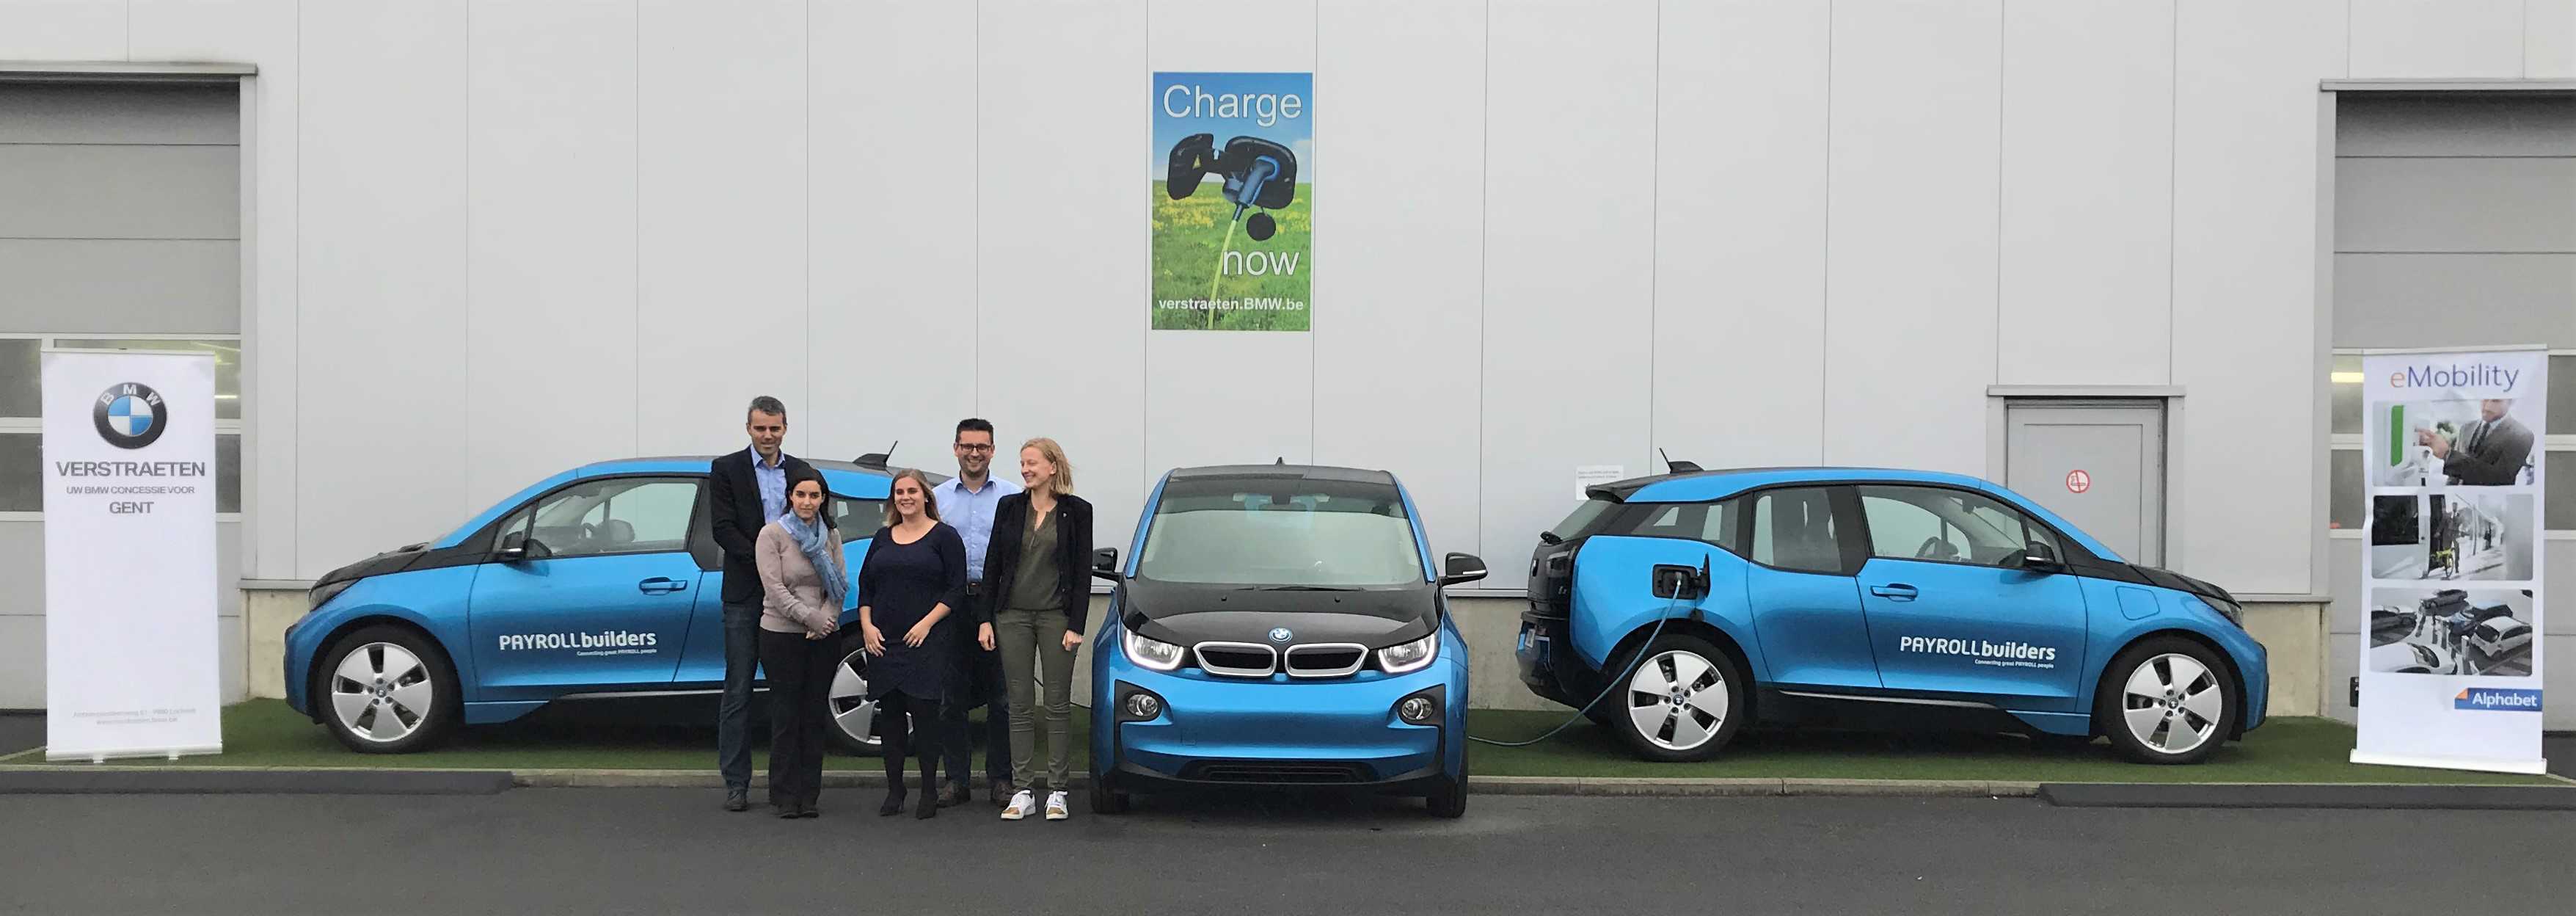 The 100% electric BMW i3 is chosen as company vehicle by Belgian HR services provider PAYROLLbuilders. (10/2017)